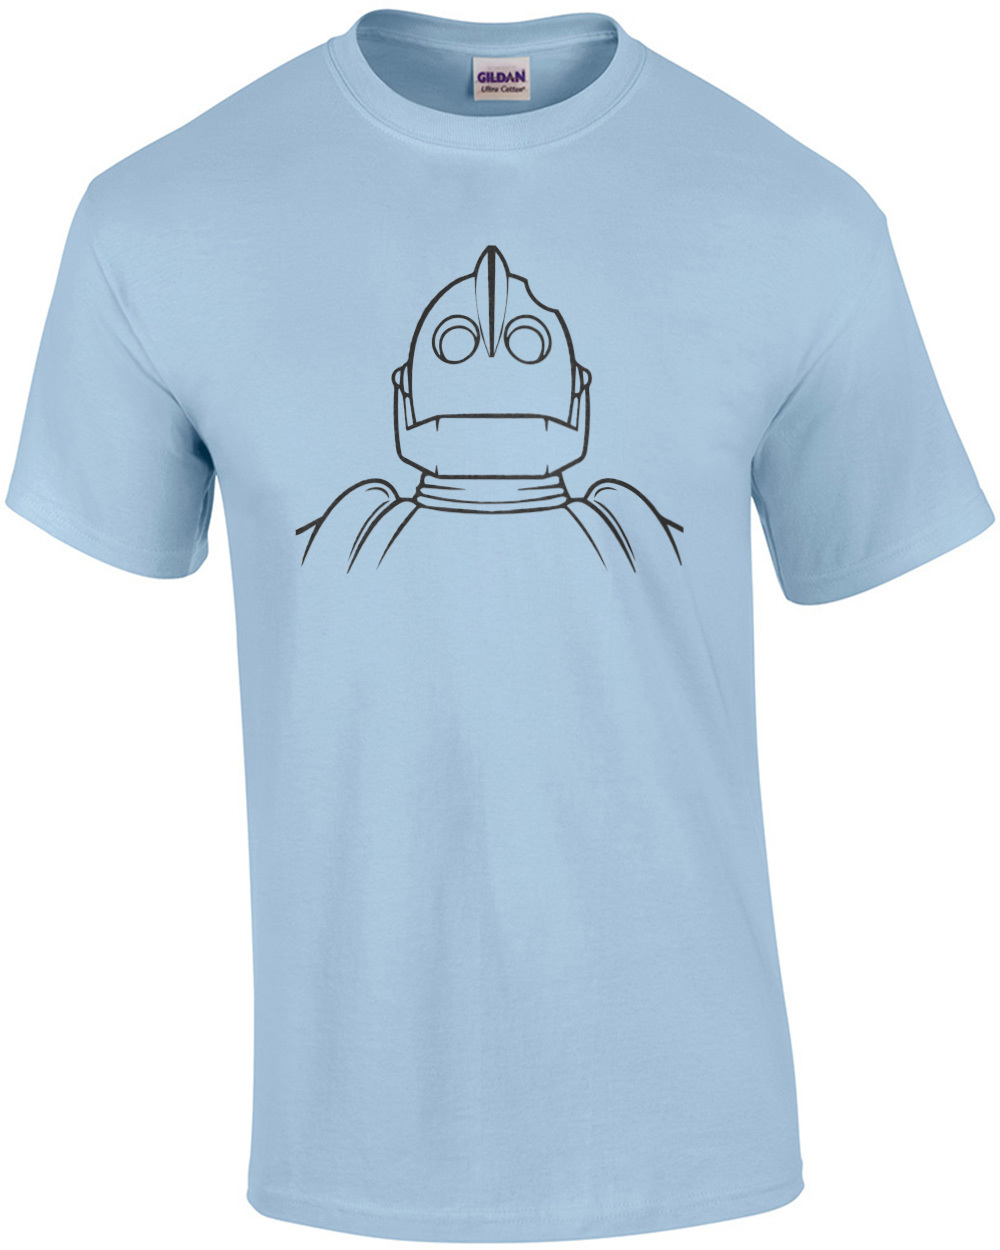 The Iron Giant - 90's T-Shirt